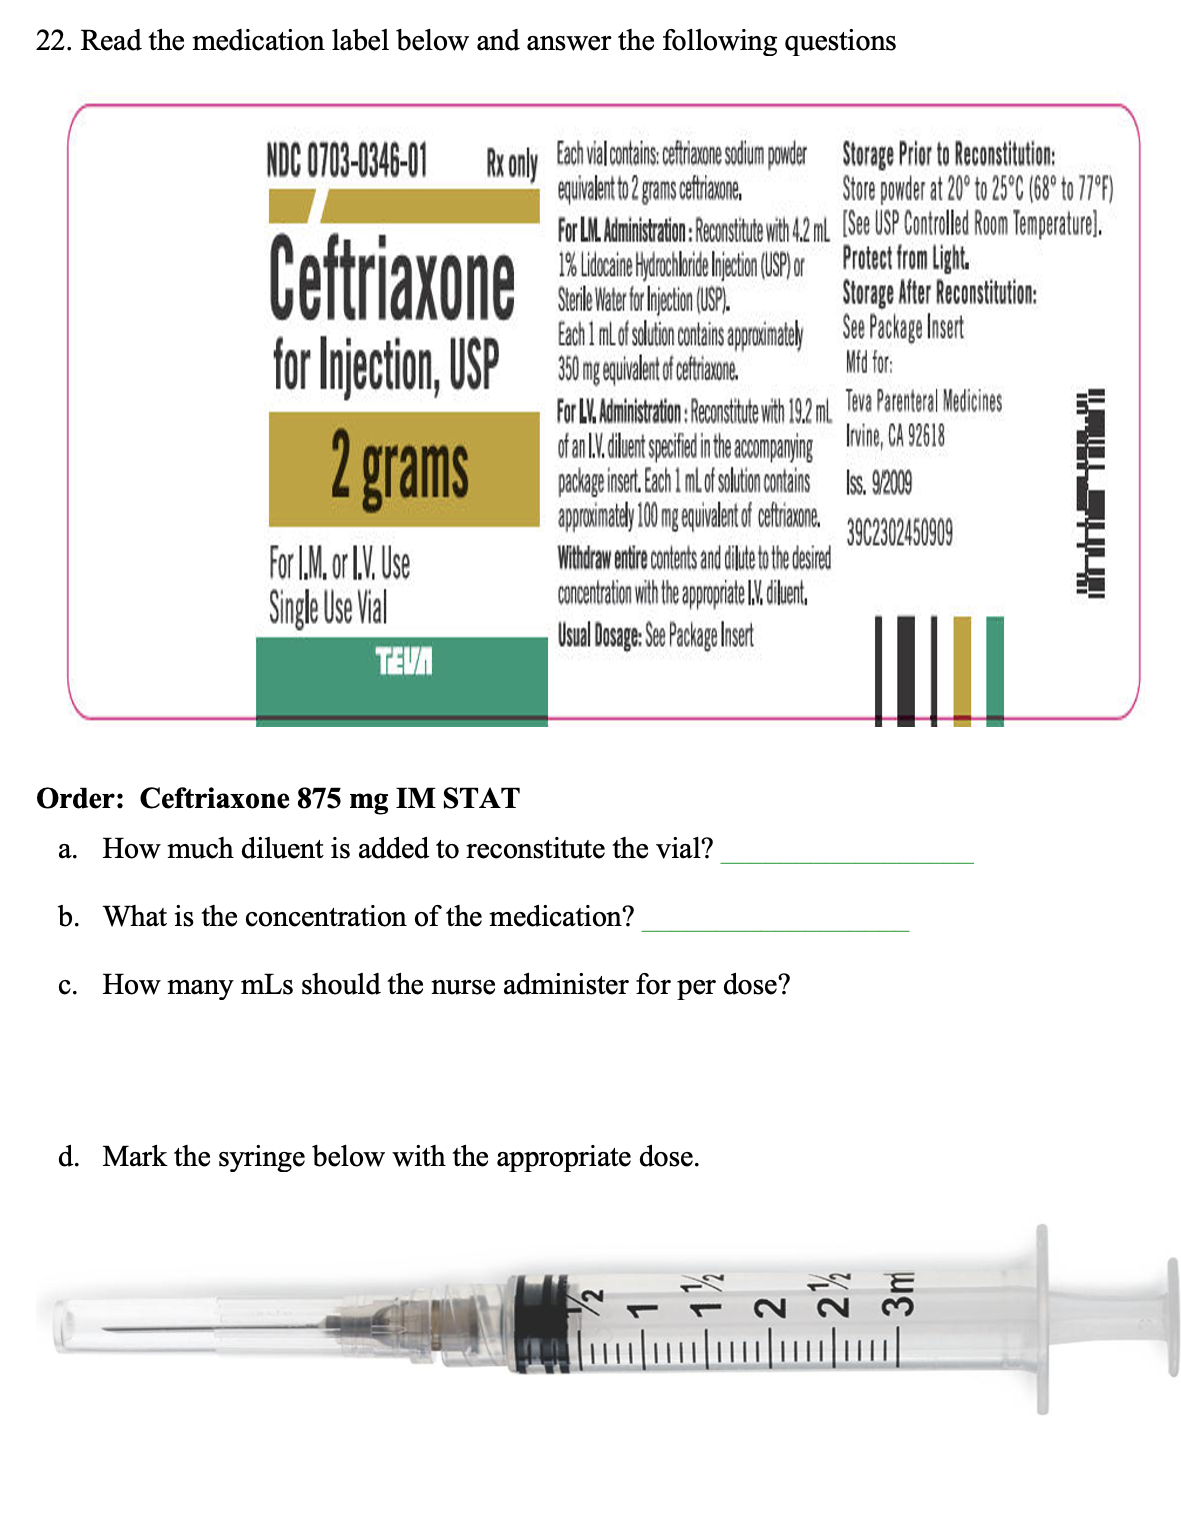 22. Read the medication label below and answer the following questions
NDC 0703-0346-01 Rx only Each vial contains: ceftriaxone sodium powder
equivalent to 2 grams ceftriaxone.
Ceftriaxone
for Injection, USP
2 grams
For I.M. or I.V. Use
Single Use Vial
TEVA
For LM. Administration: Reconstitute with 4.2 mL
1% Lidocaine Hydrochloride Injection (USP) or
Sterile Water for Injection (USP).
Each 1 mL of solution contains approximately
350 mg equivalent of ceftriaxone.
For LV. Administration: Reconstitute with 19.2 ml.
of an L.V. diluent specified in the accompanying
package insert. Each 1 mL of solution contains
approximately 100 mg equivalent of ceftriaxone.
Withdraw entire contents and dilute to the desired
concentration with the appropriate I.V. diluent.
Usual Dosage: See Package Insert
Order: Ceftriaxone 875 mg IM STAT
a. How much diluent is added to reconstitute the vial?
b. What is the concentration of the medication?
c. How many mLs should the nurse administer for
per dose?
d. Mark the syringe below with the appropriate dose.
Storage Prior to Reconstitution:
Store powder at 20° to 25°C (68° to 77°F)
[See USP Controlled Room Temperature).
Protect from Light.
Storage After Reconstitution:
See Package Insert
Mfd for:
Teva Parenteral Medicines
Irvine, CA 92618
Iss. 9/2009
3902302450909
S
[////
KOSUV